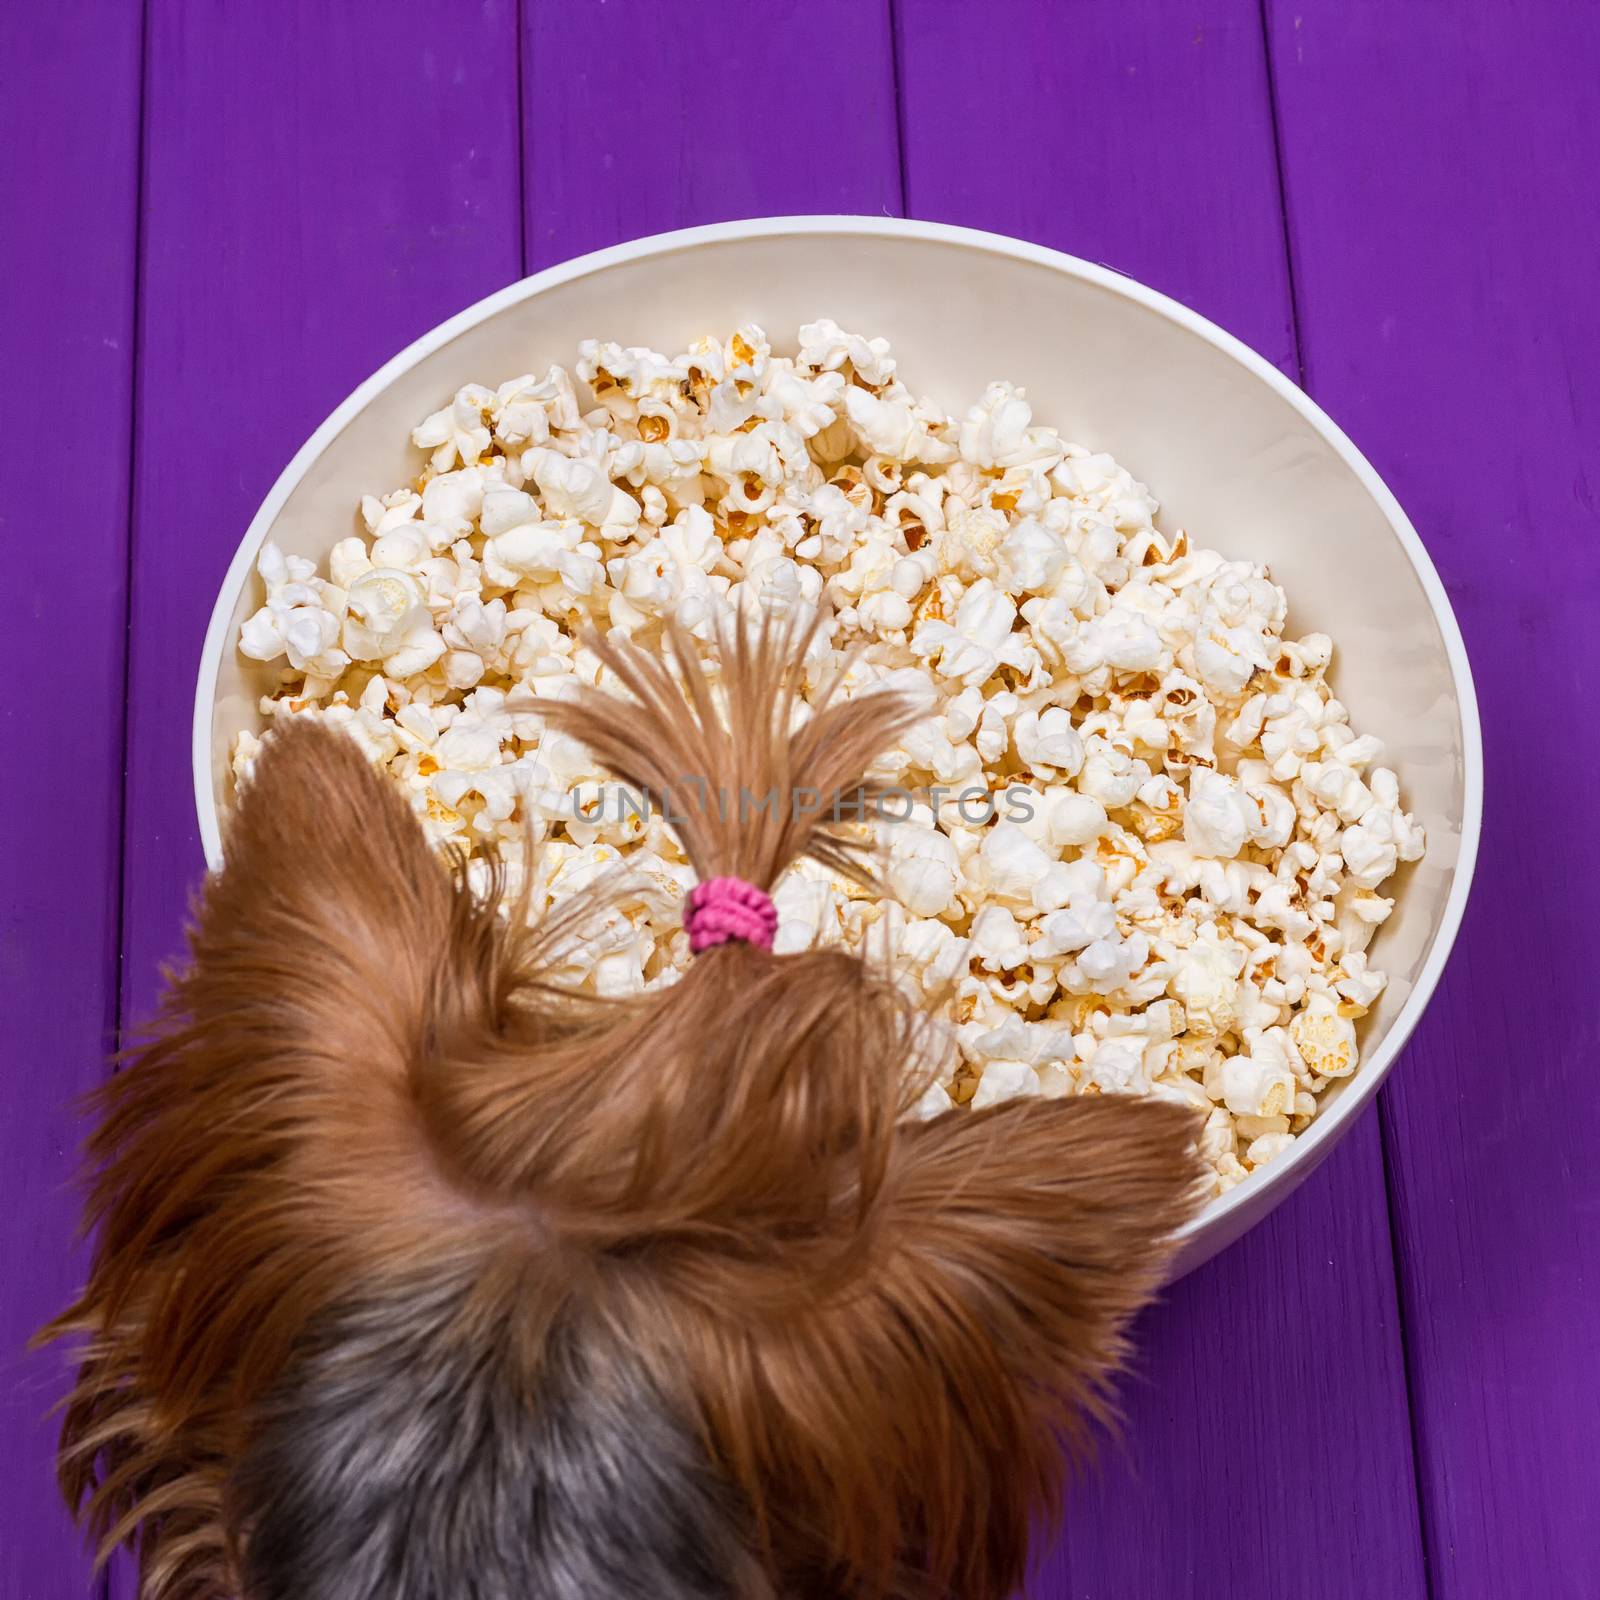 Head of a Yorkshire terrier next to a bowl of popcorn. The dog is eating popcorn